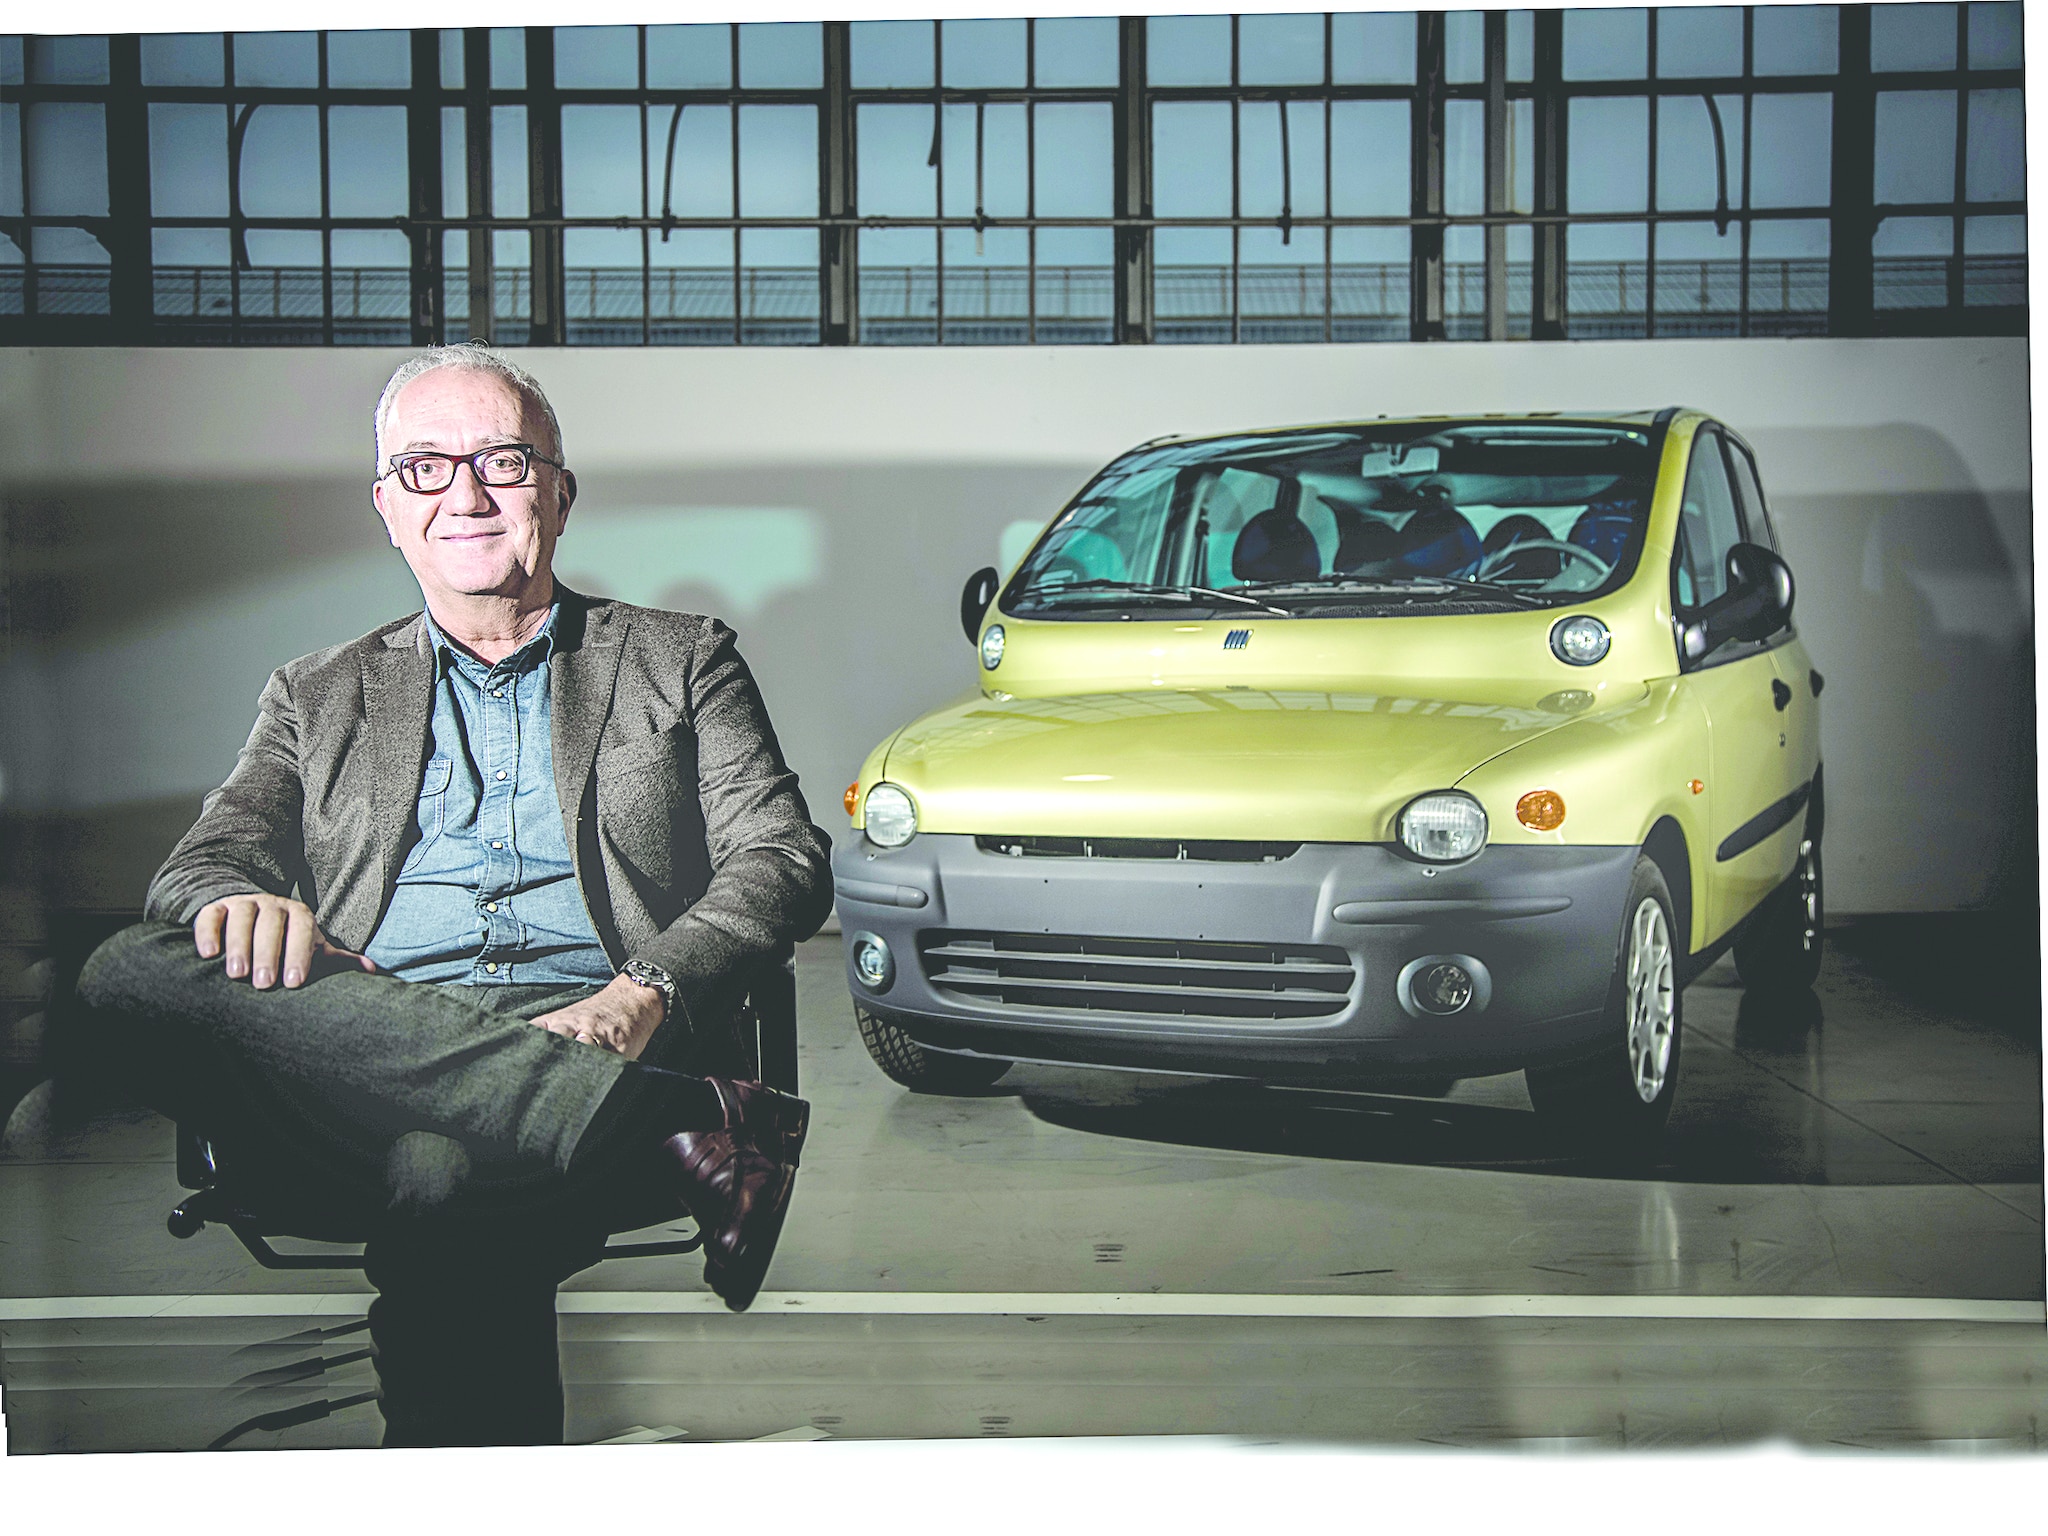 Fiat Multipla The Triumph Of Function Over Form Domus